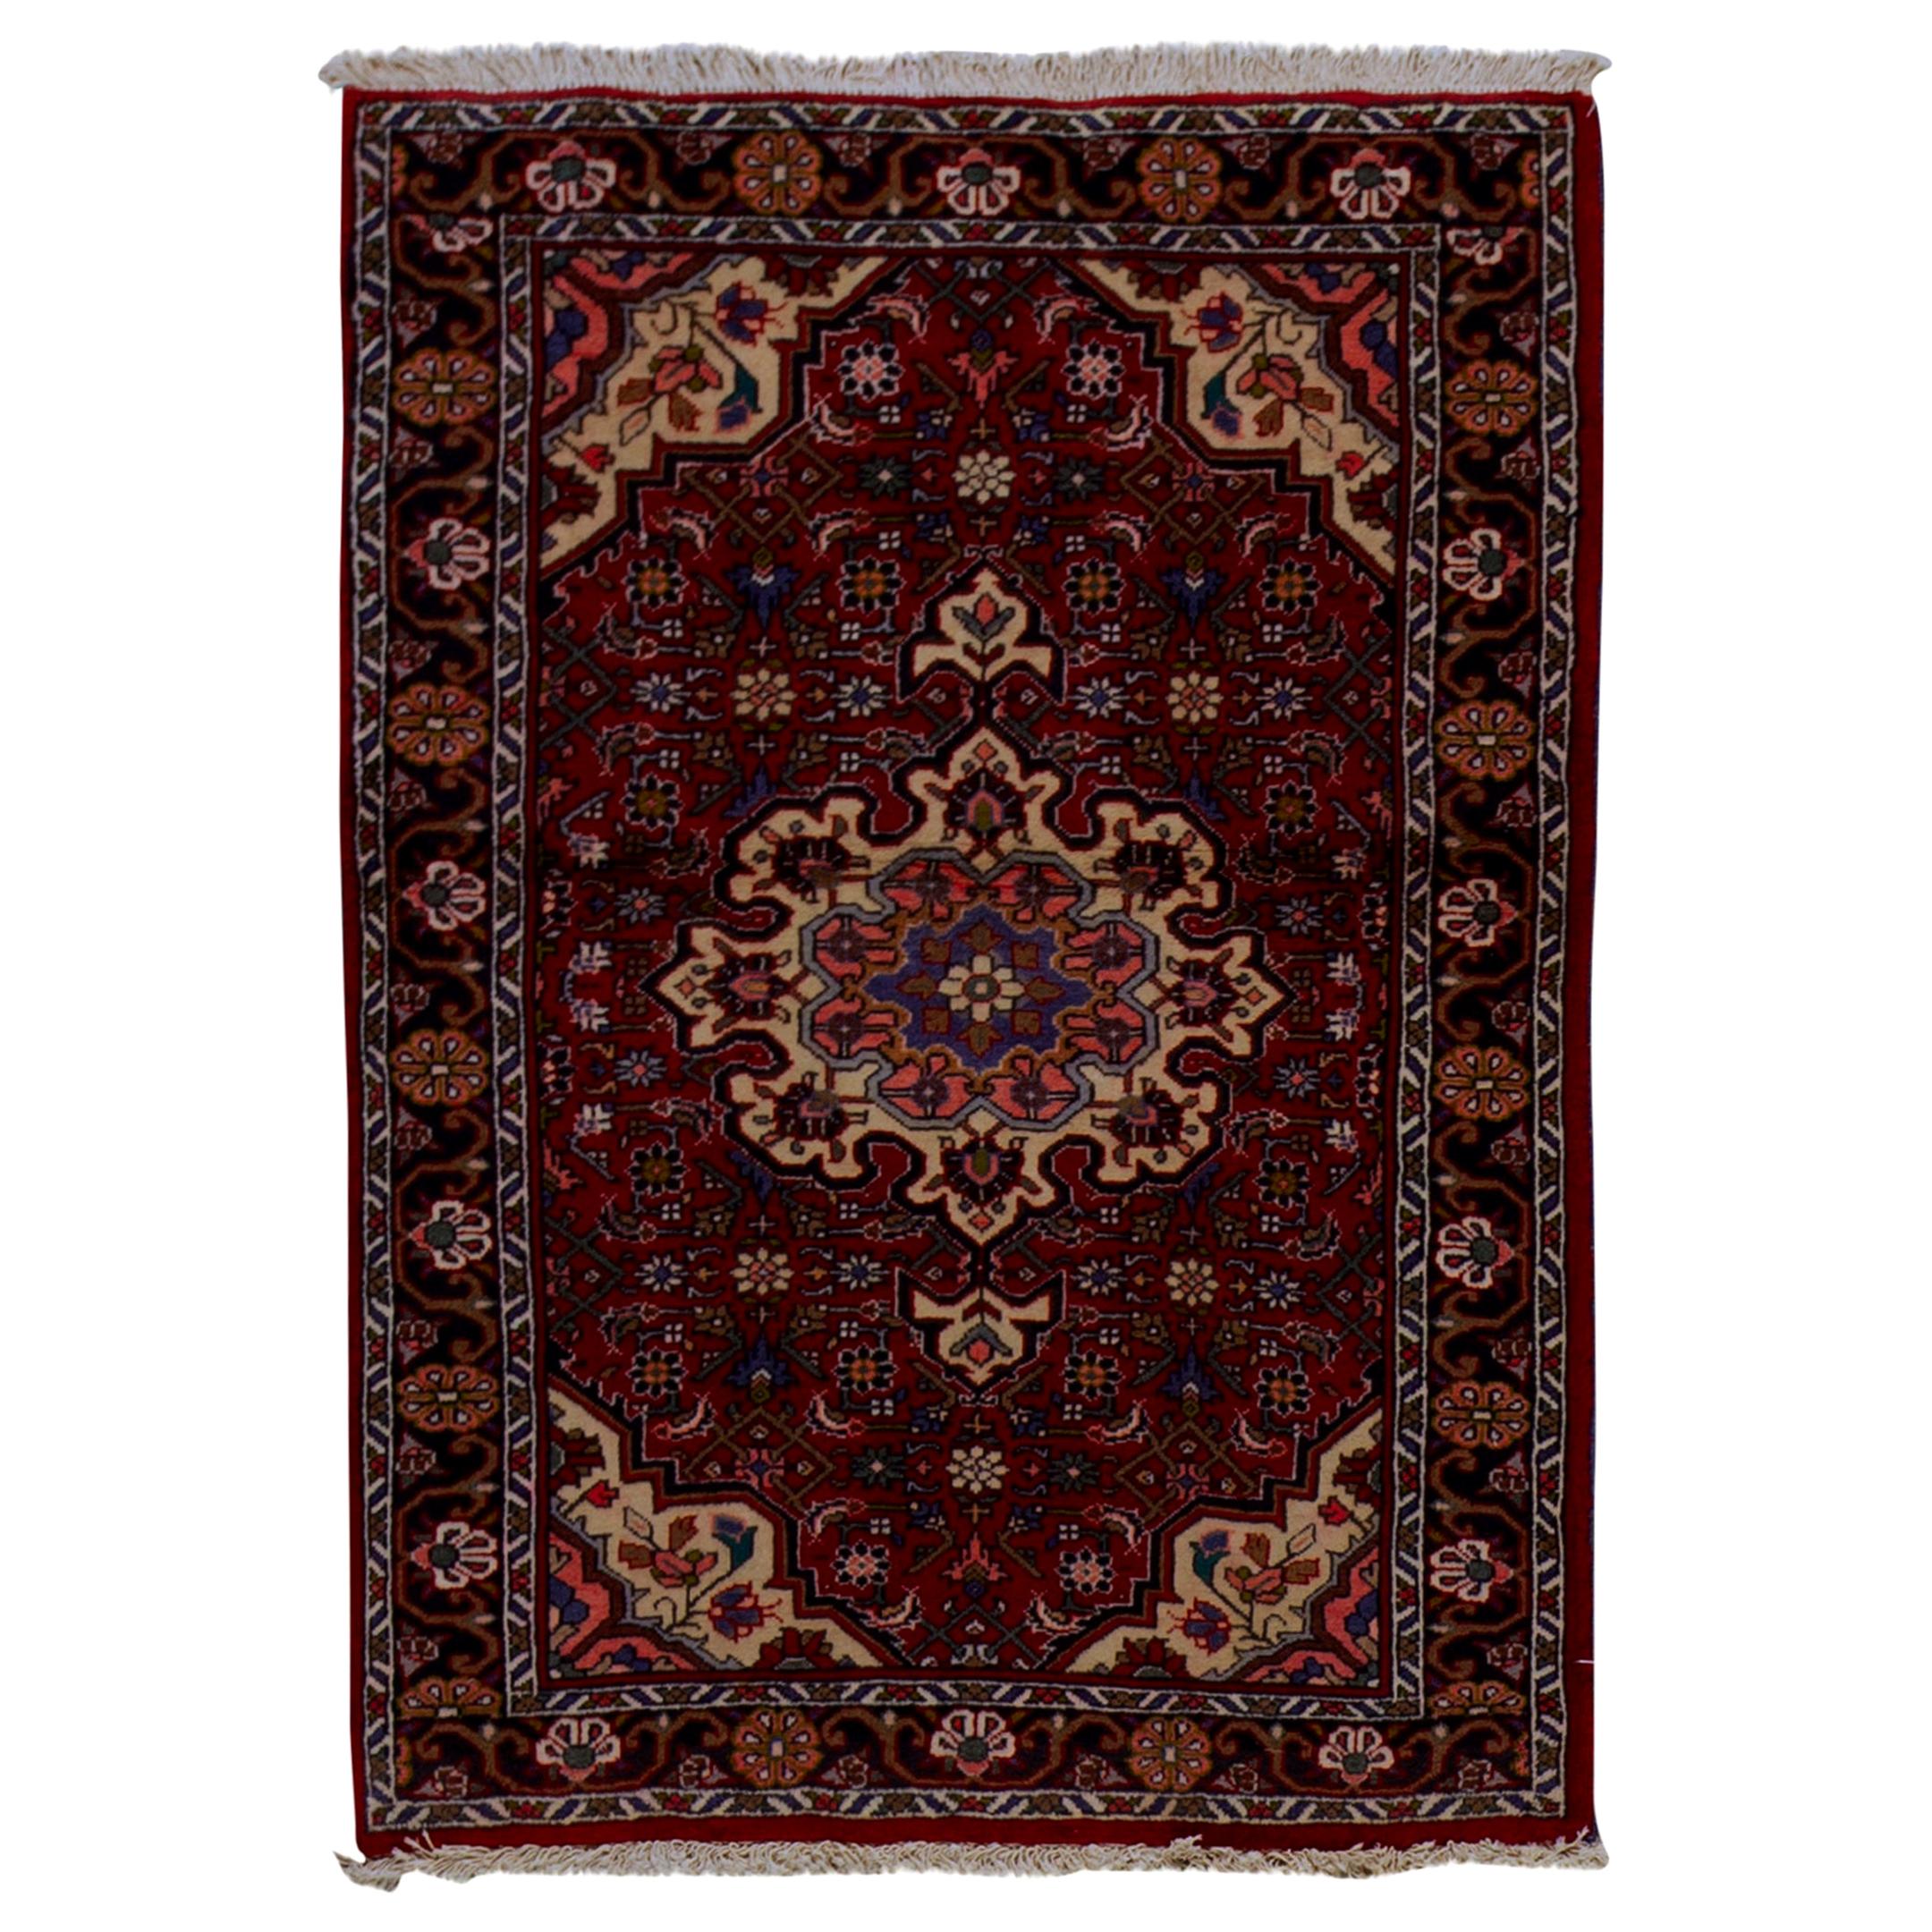  Traditional Handwoven Luxury Wool Semi Antique Persian Red  For Sale